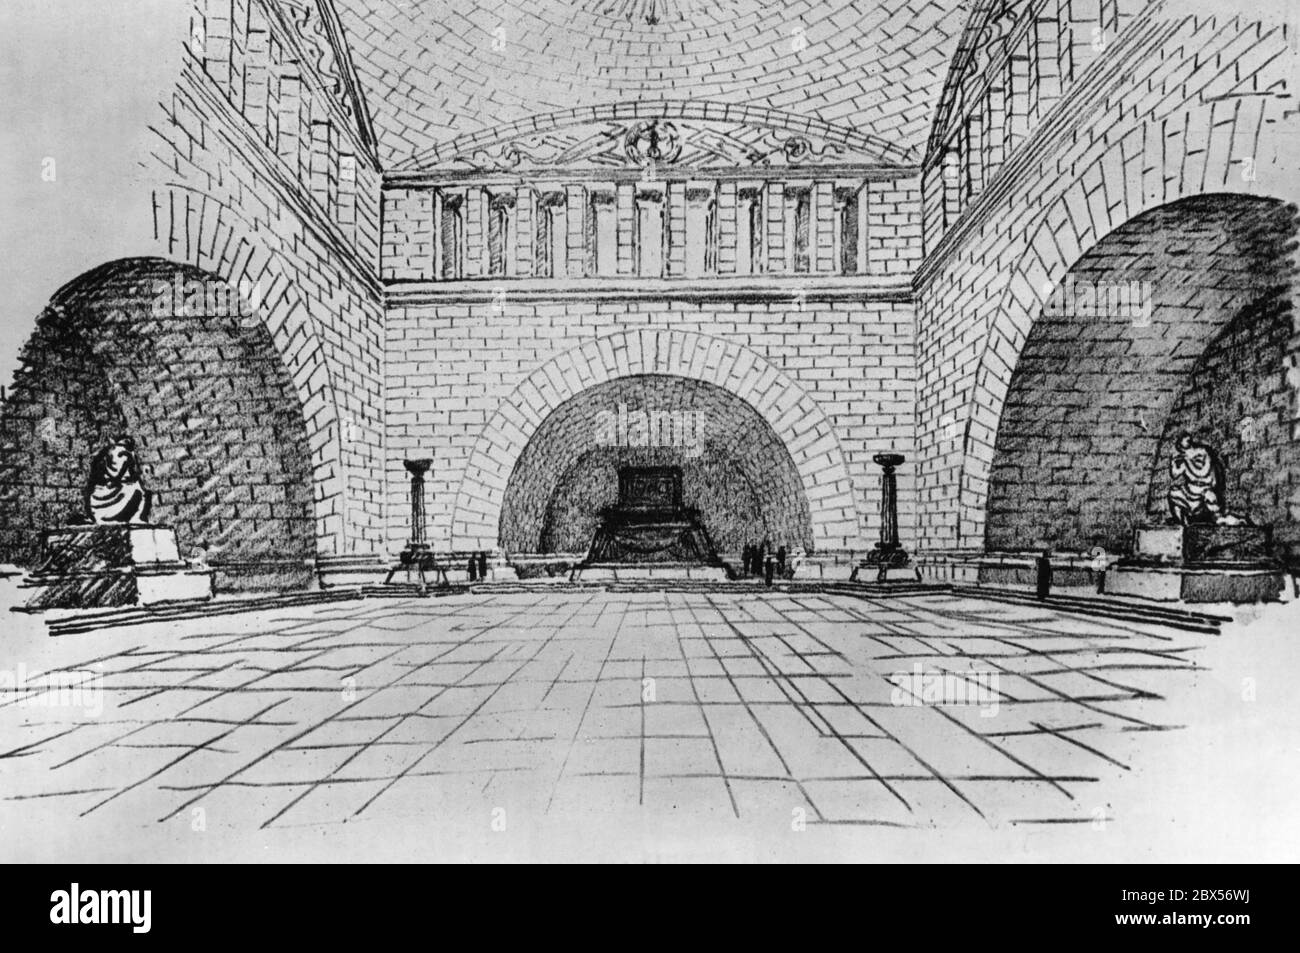 The design of the Great Memorial drawn by Wilhelm Kreis. It is an interior view of the planned Totenburg ('castle for the dead') for war victims. Stock Photo